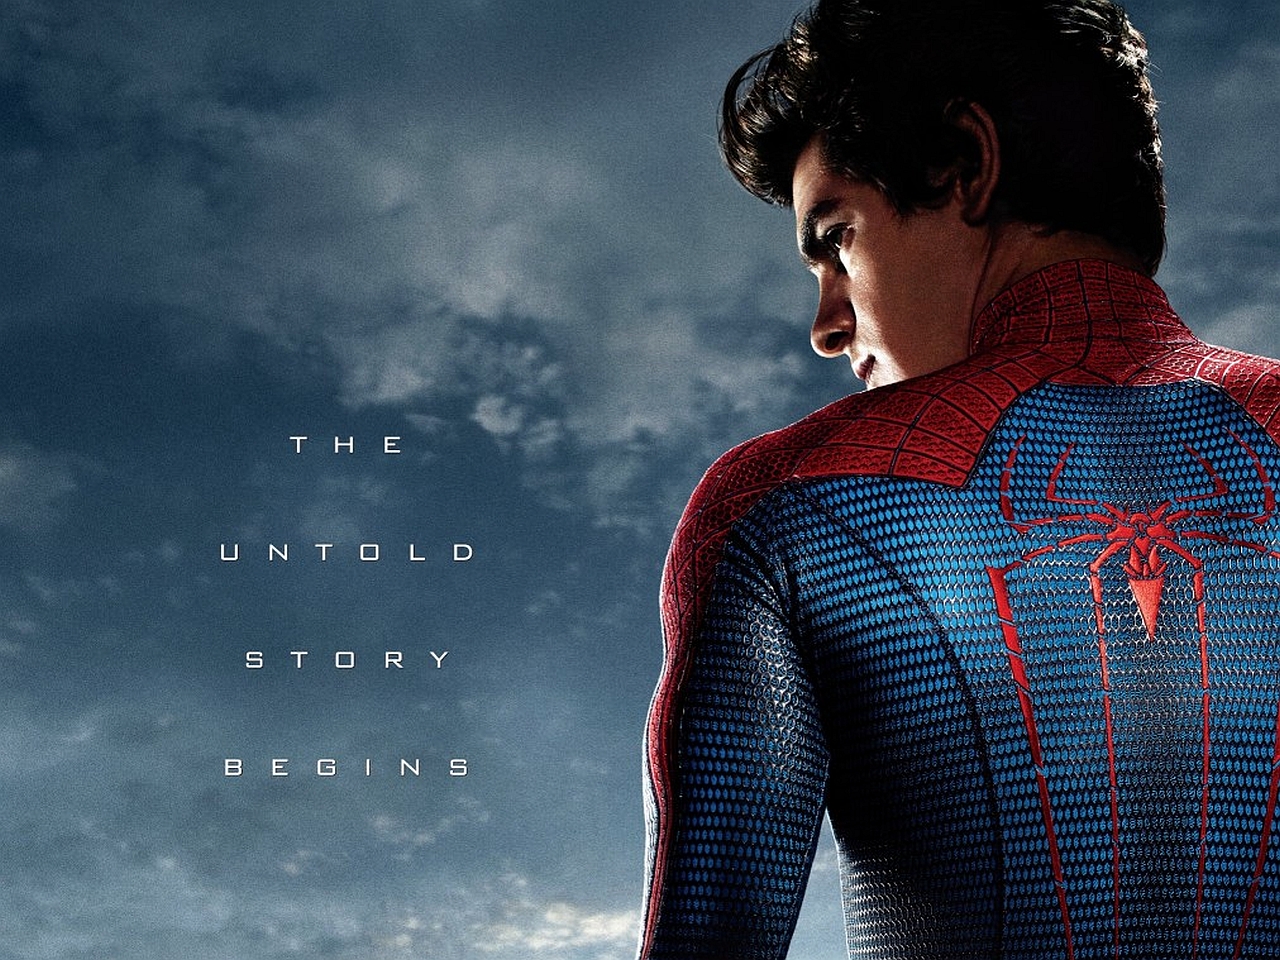 Free download wallpaper Movie, The Amazing Spider Man on your PC desktop